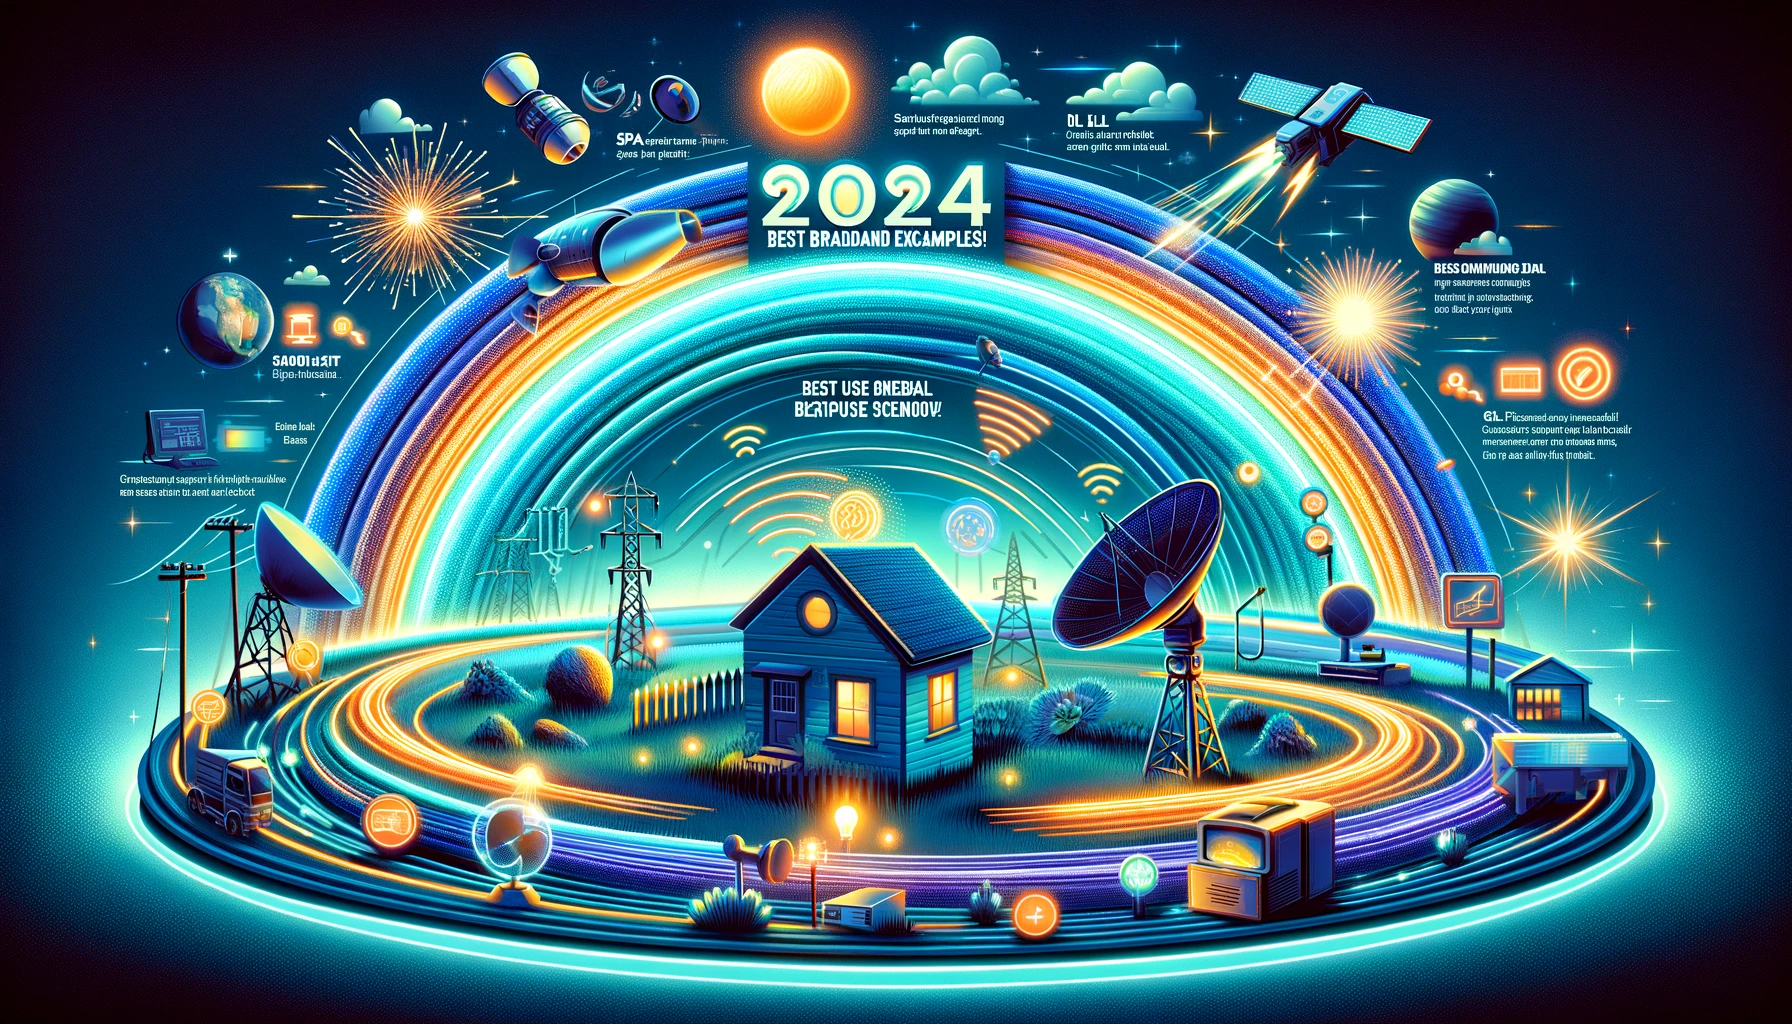 broadband technologies in 2024, showing fiber-optic, satellite, DSL, and cable.